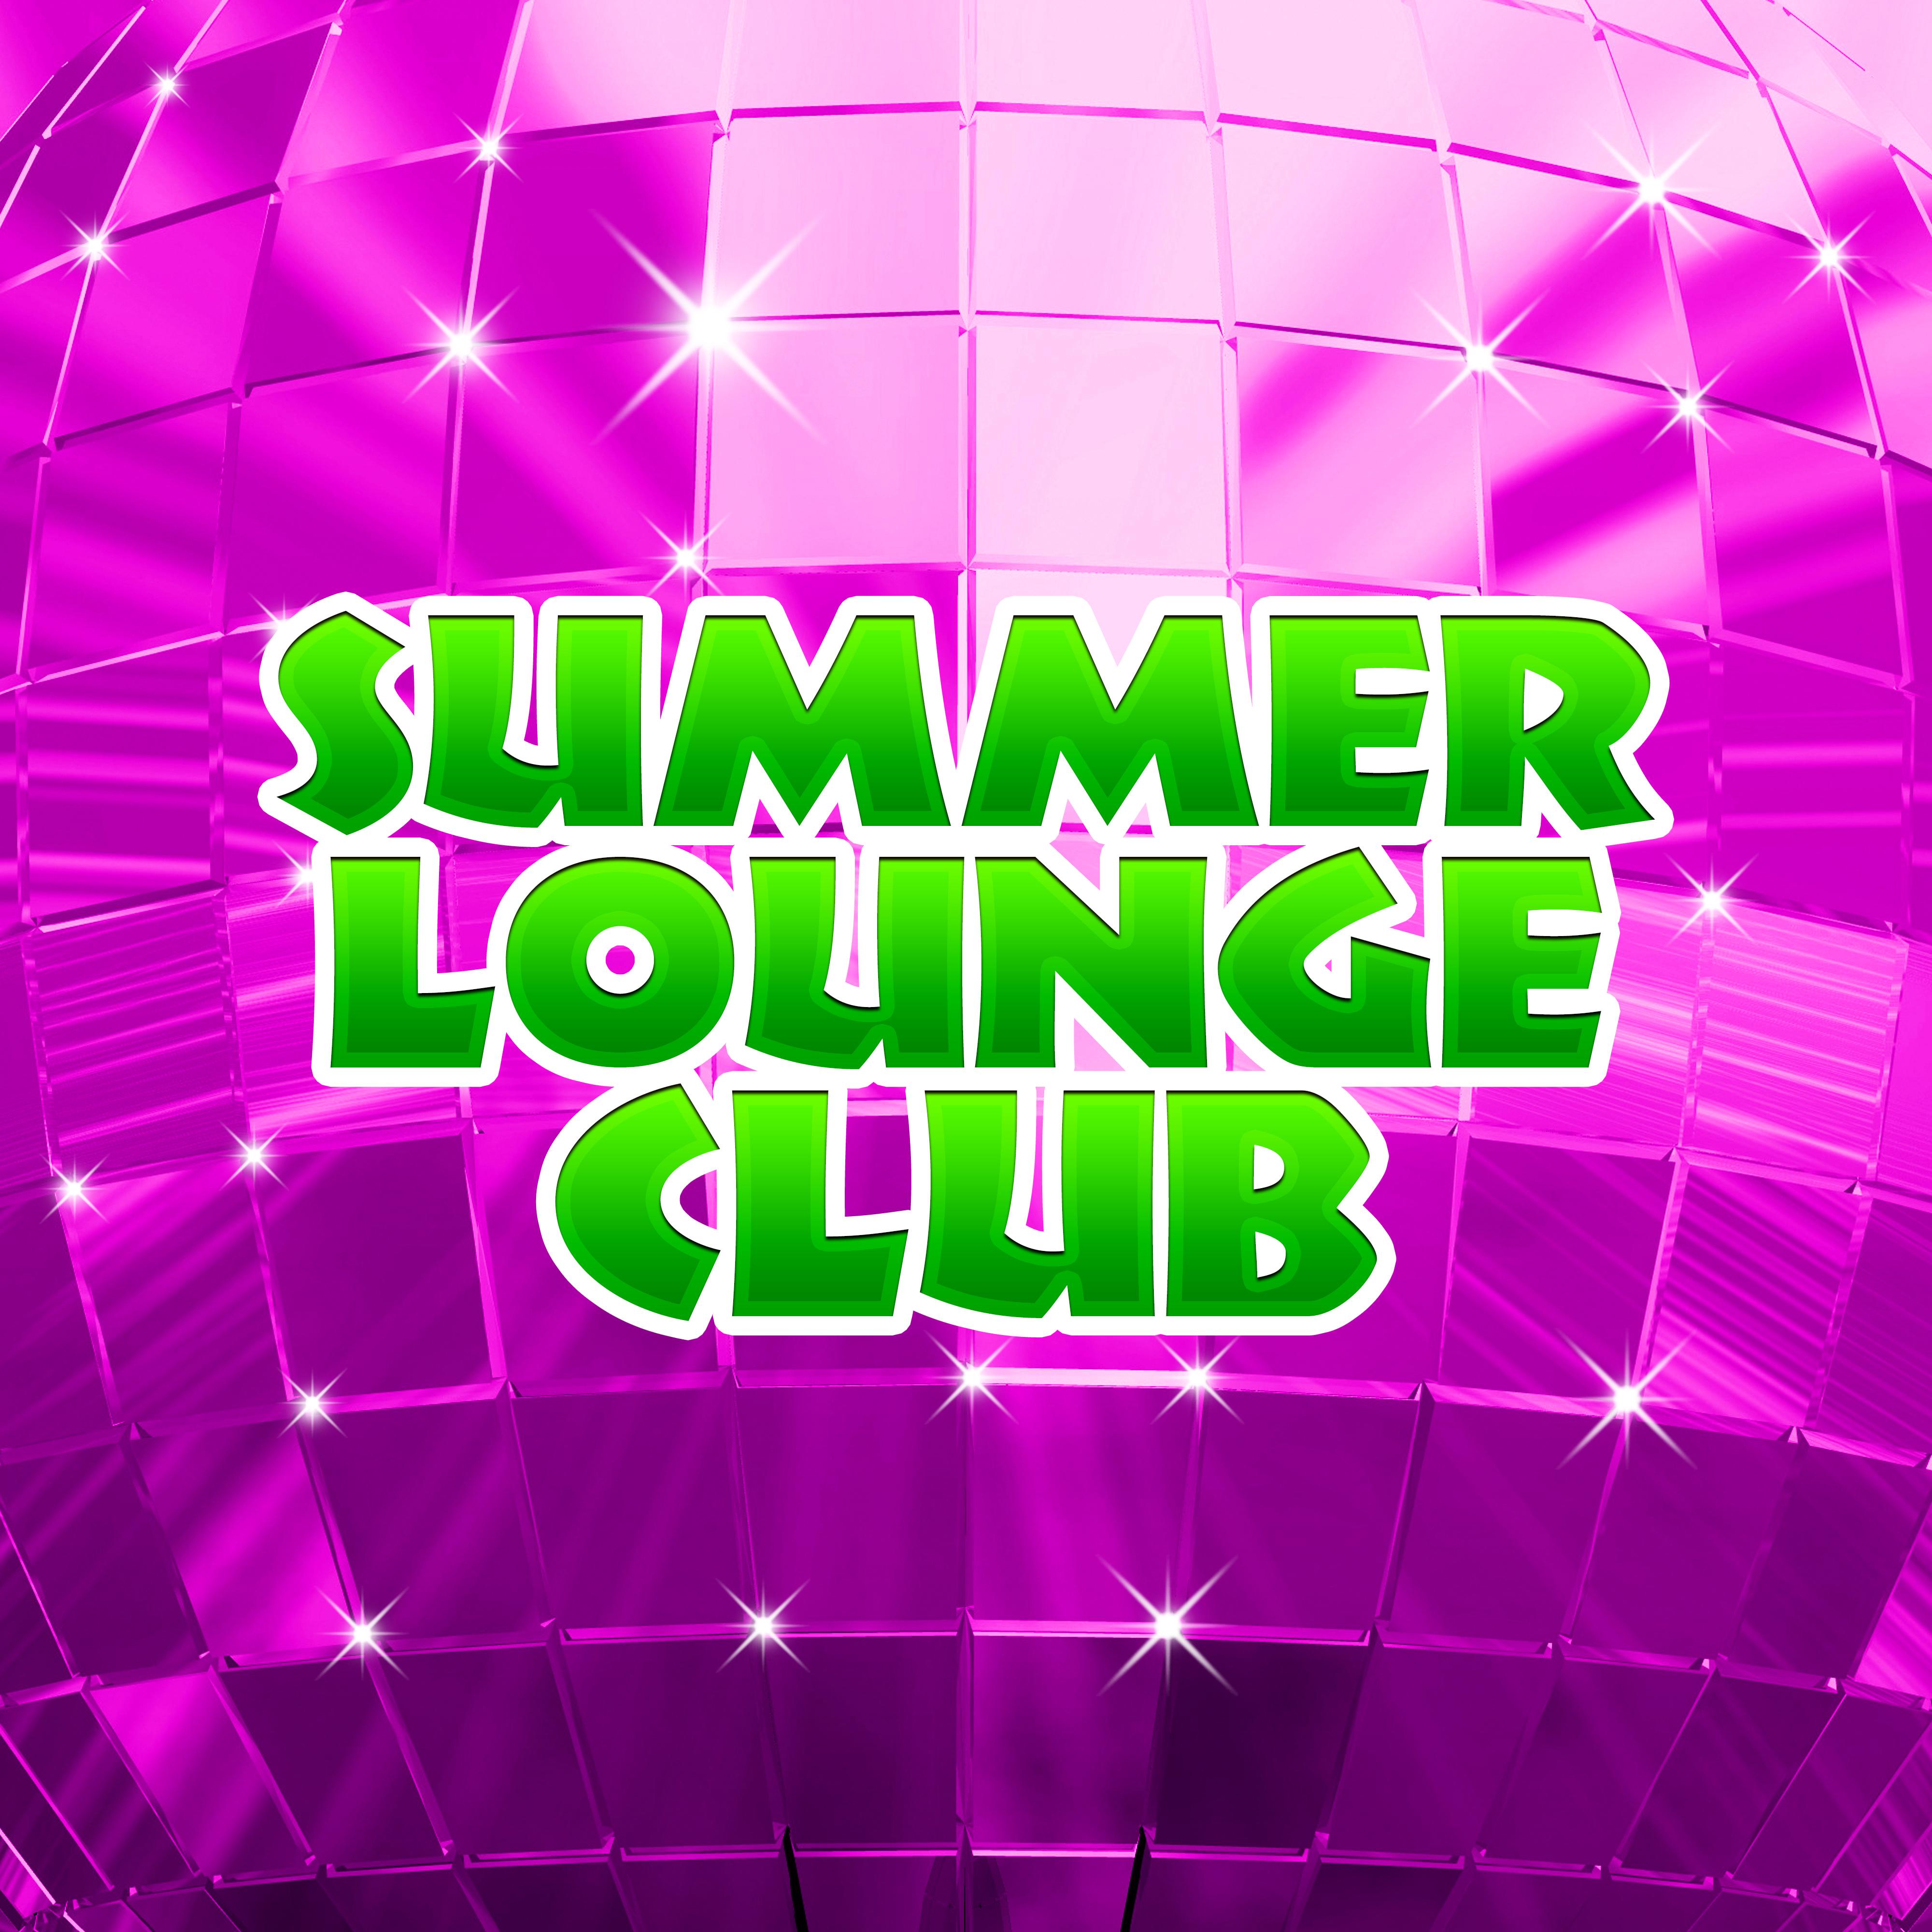 Summer Lounge Club – Chill Out 2017, Beach Chill Out, Relax, Summertime, Chillout, Dance Music